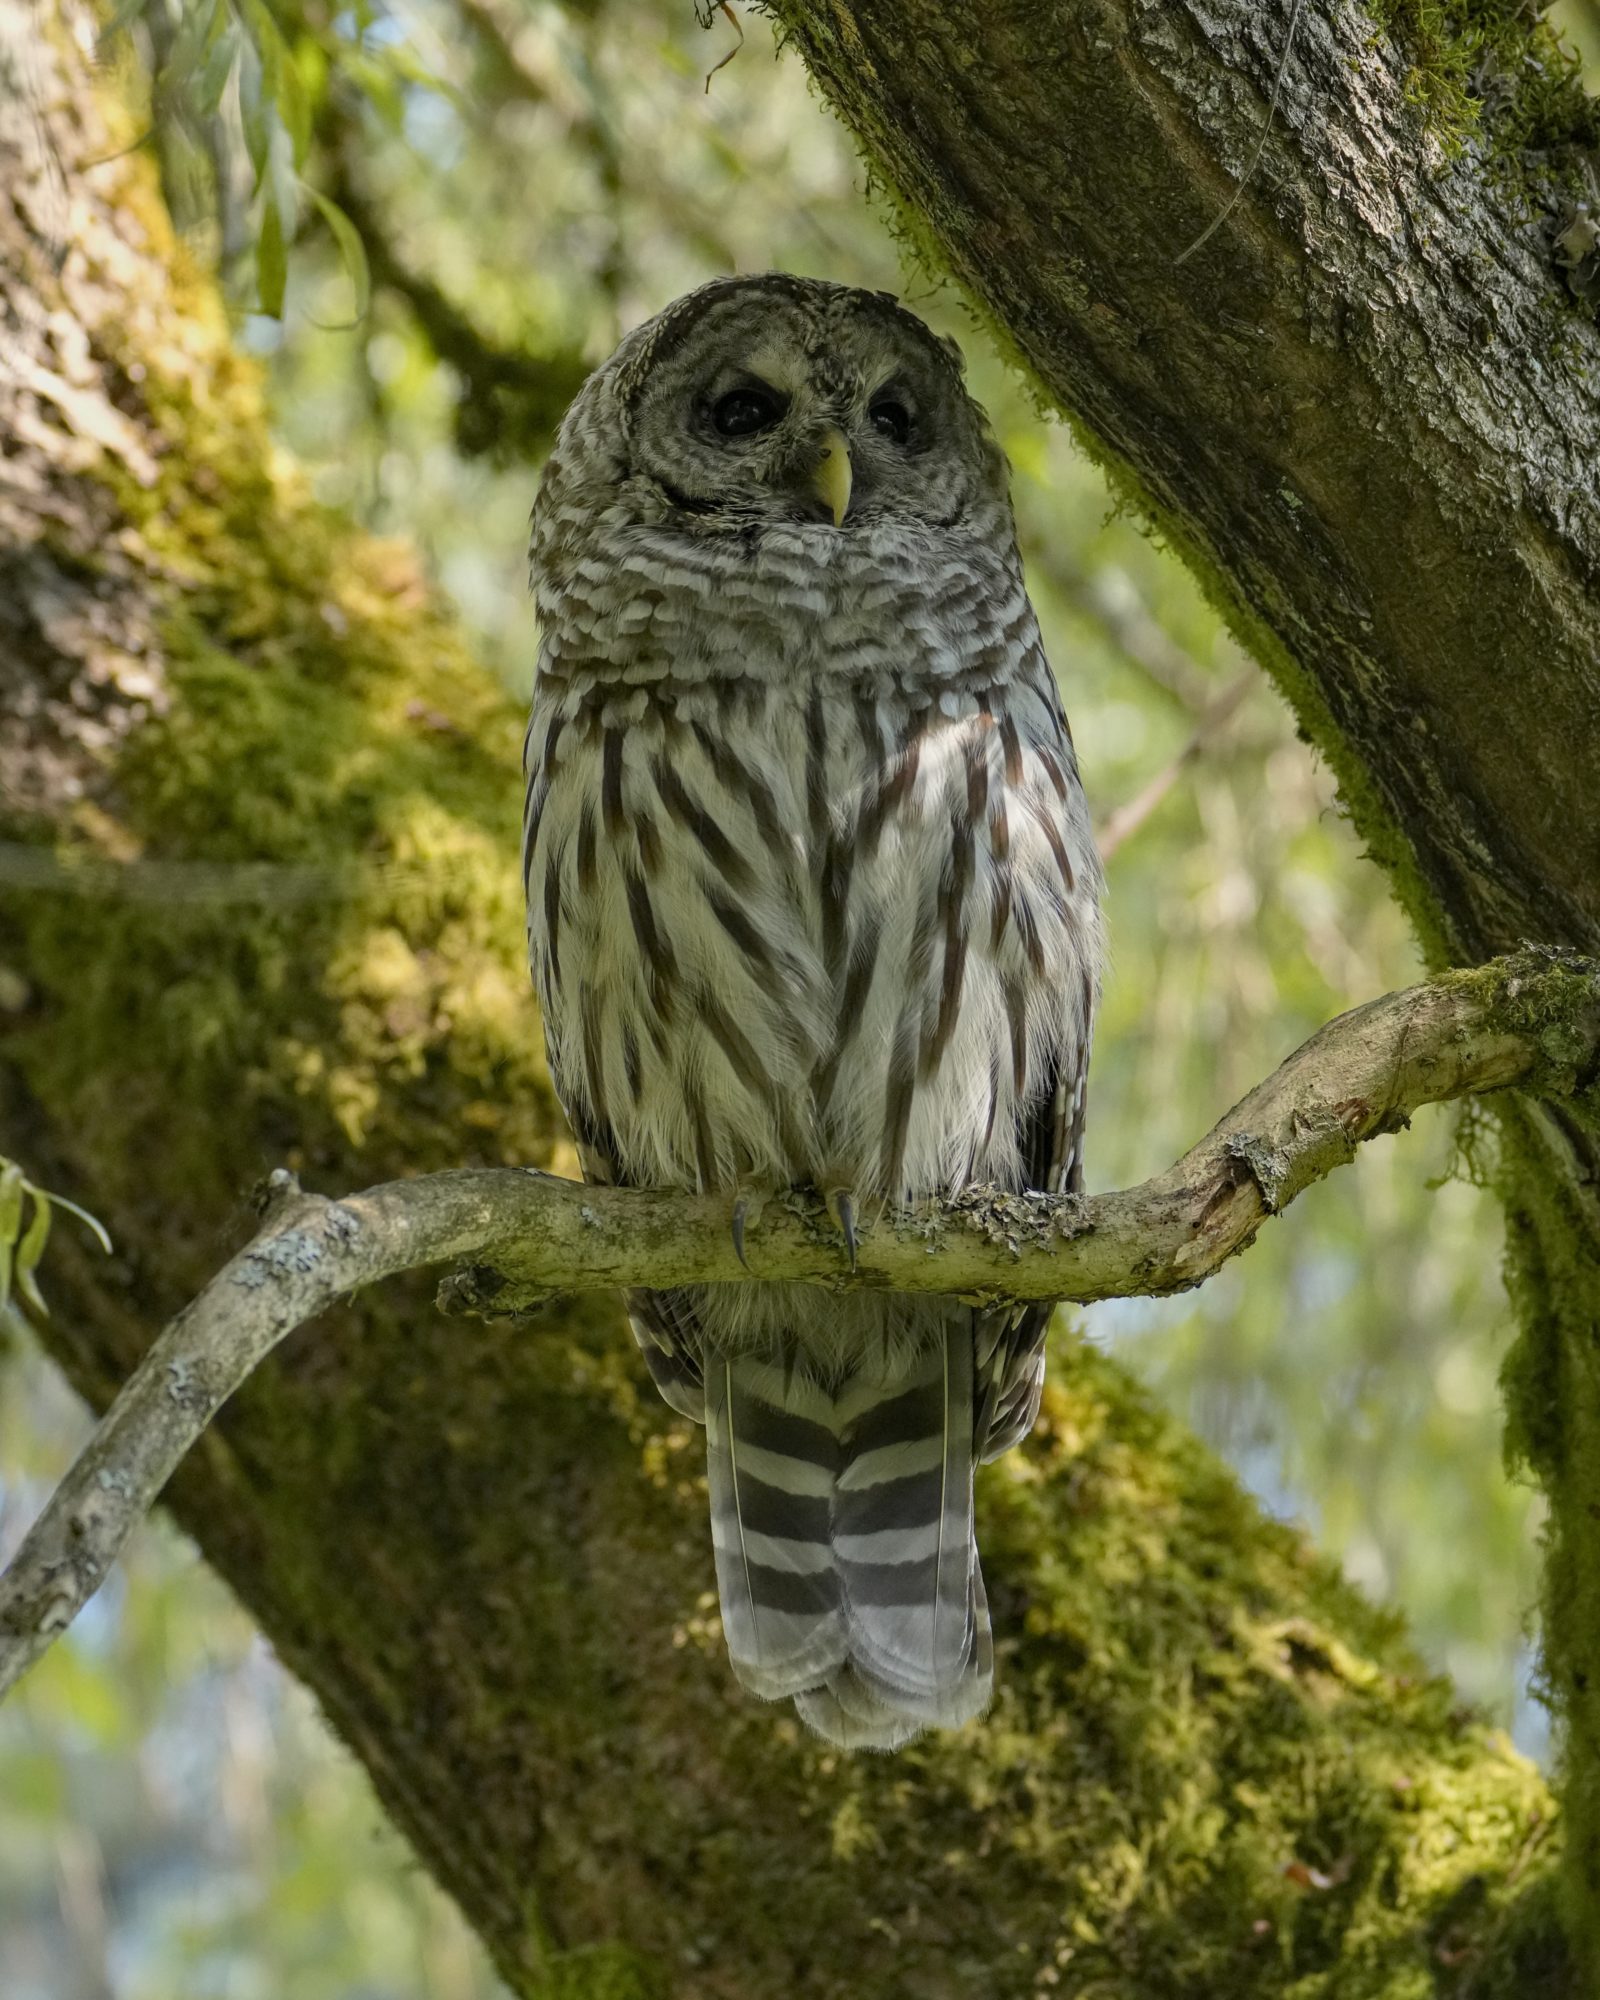 A Barred Owl is sitting on a branch, in the shade during the day